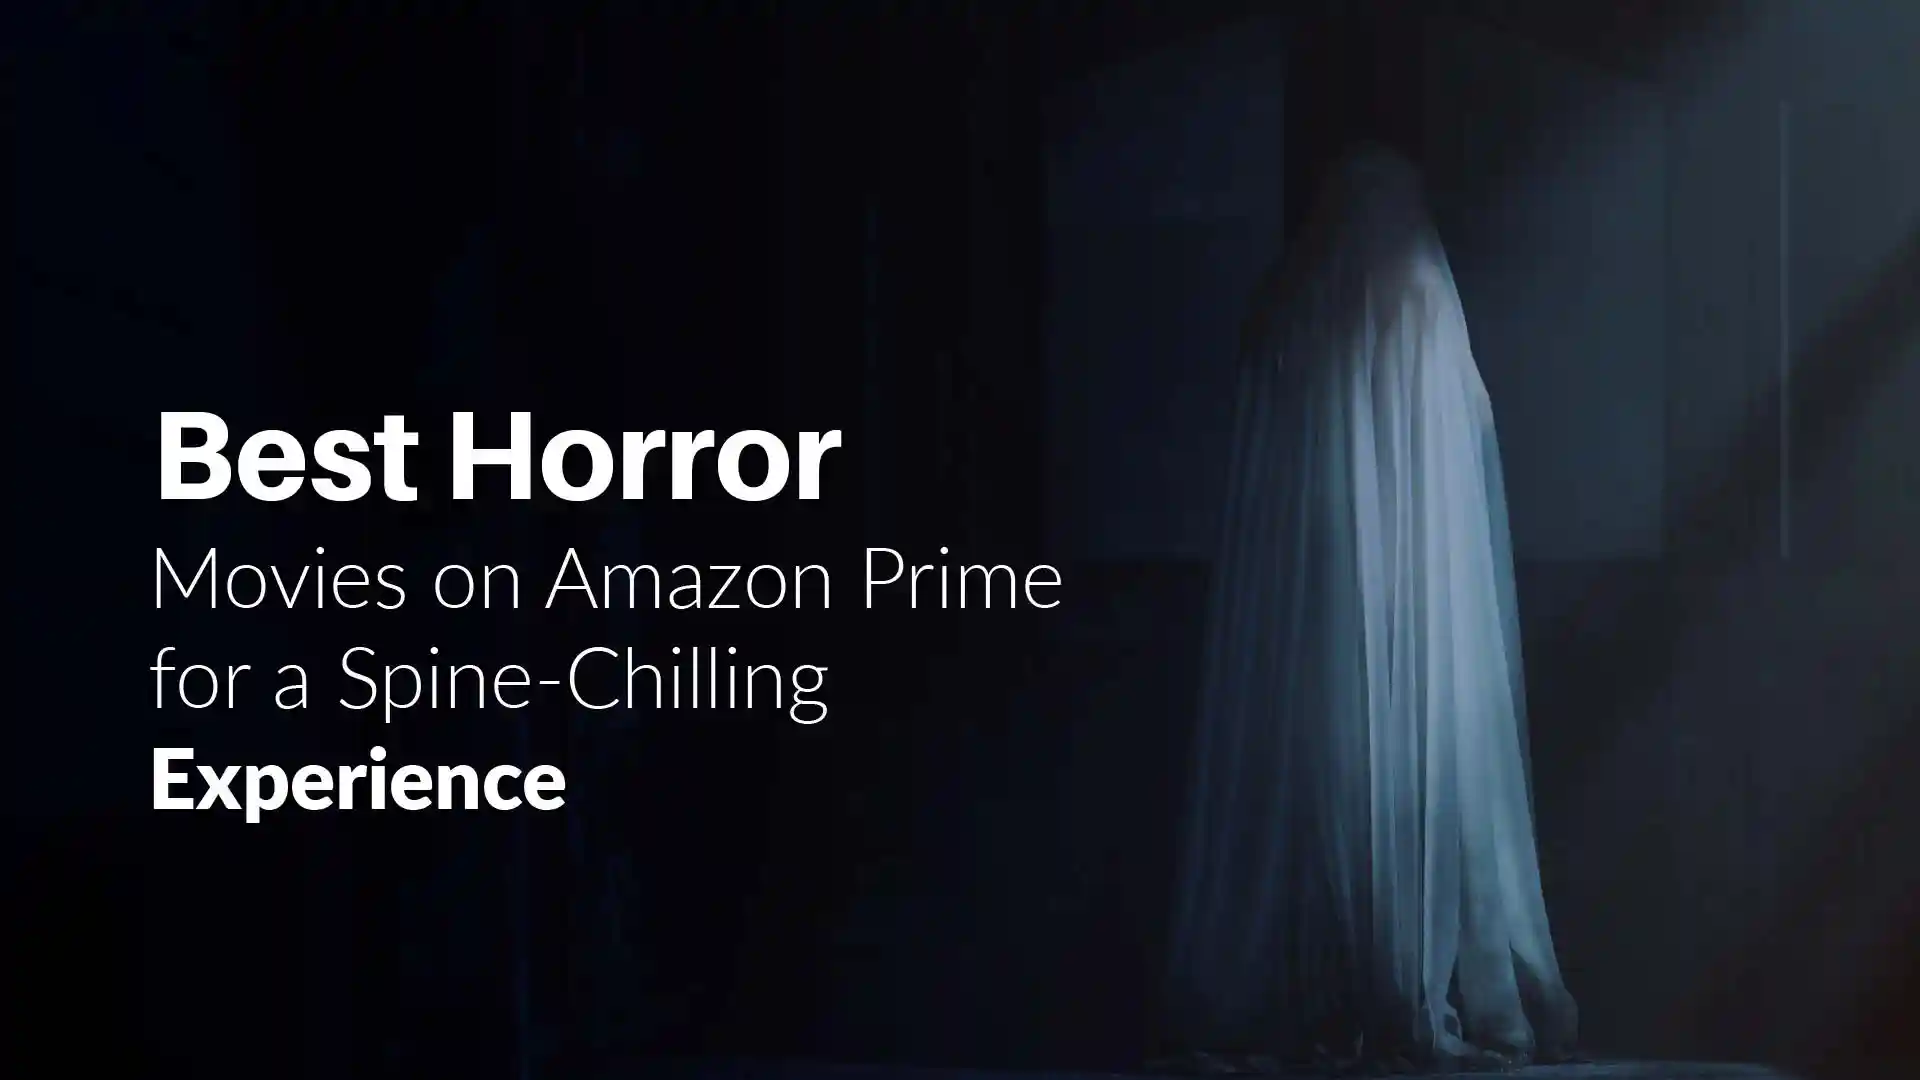 10 Best Horror Movies on Amazon Prime for a SpineChilling Experience